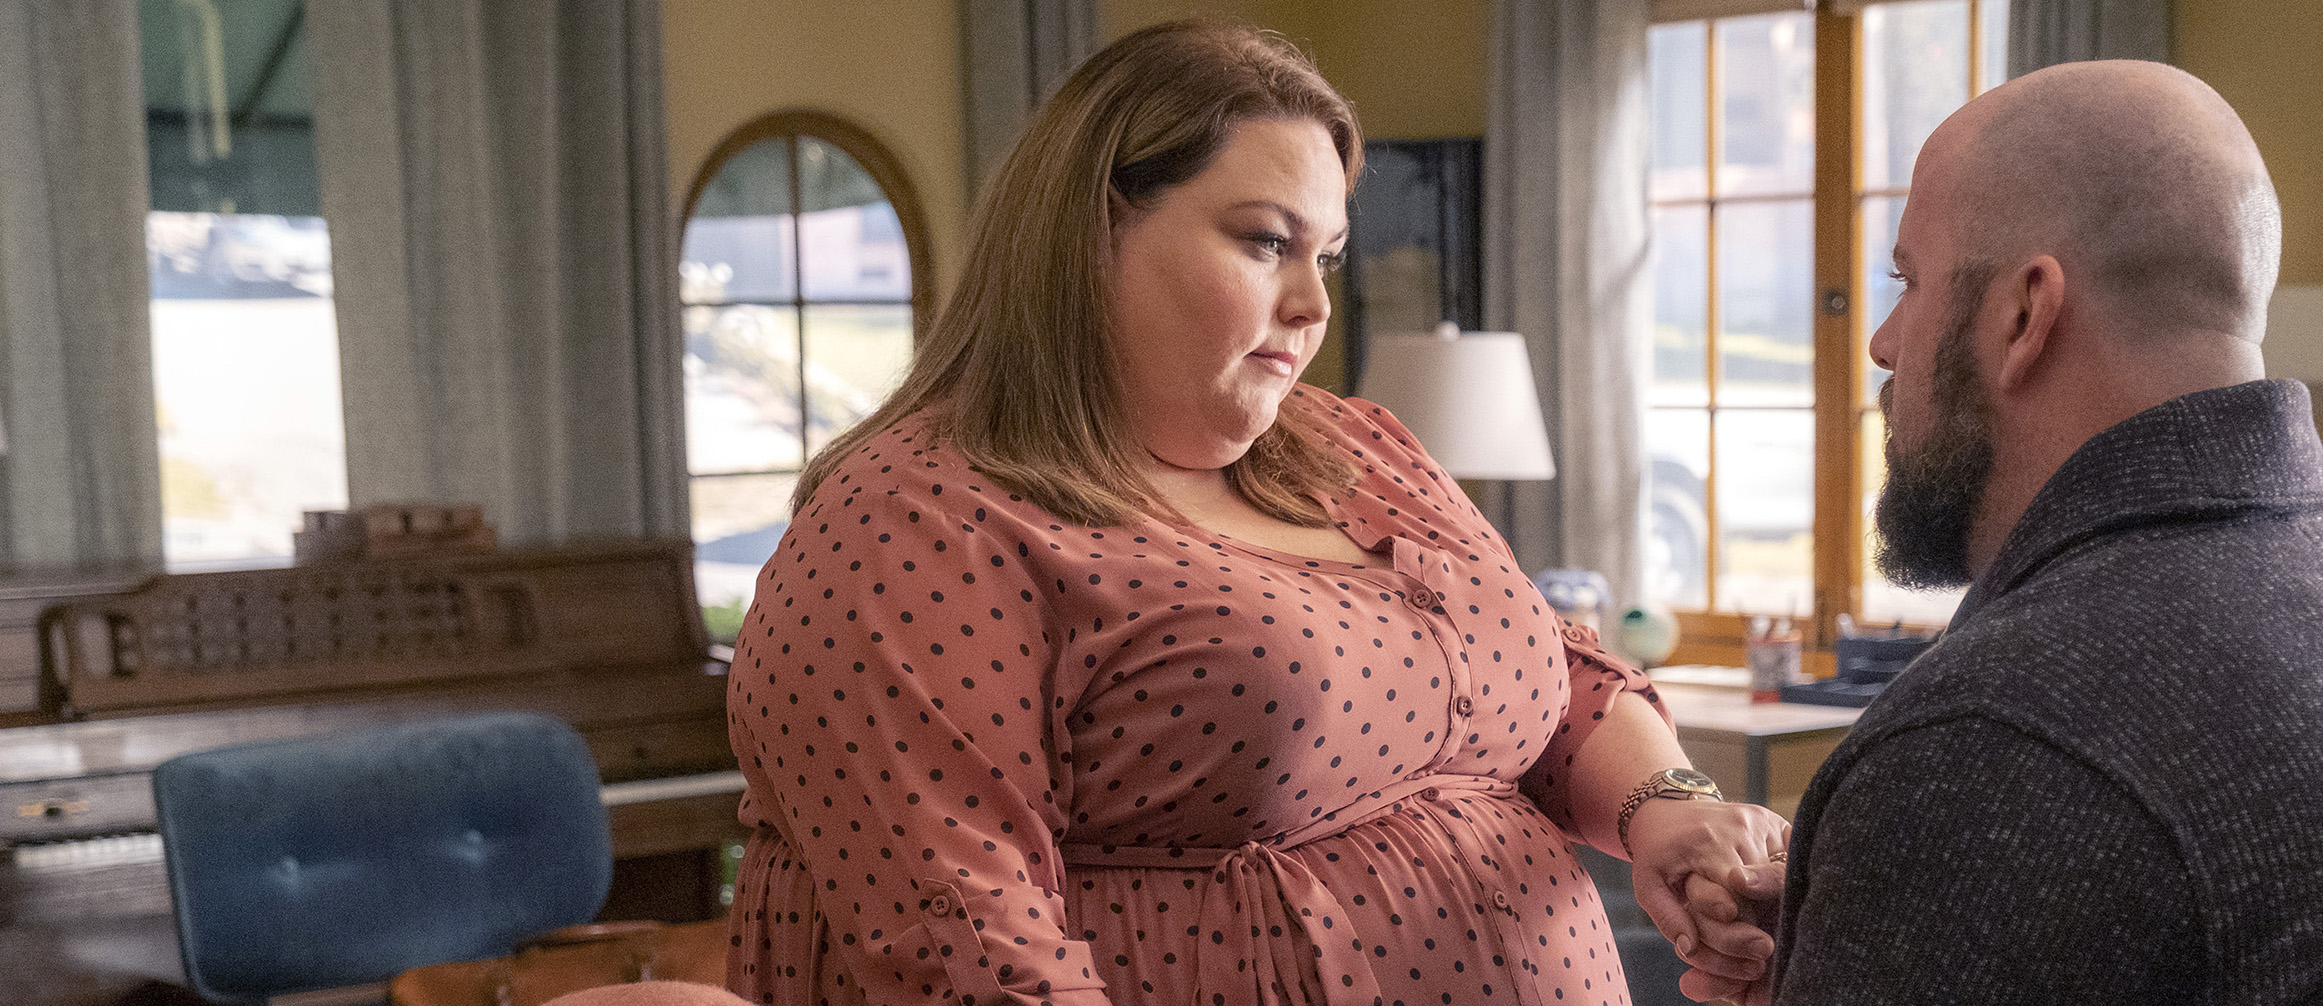 Is Chrissy Metz Married? Does She Have Children?